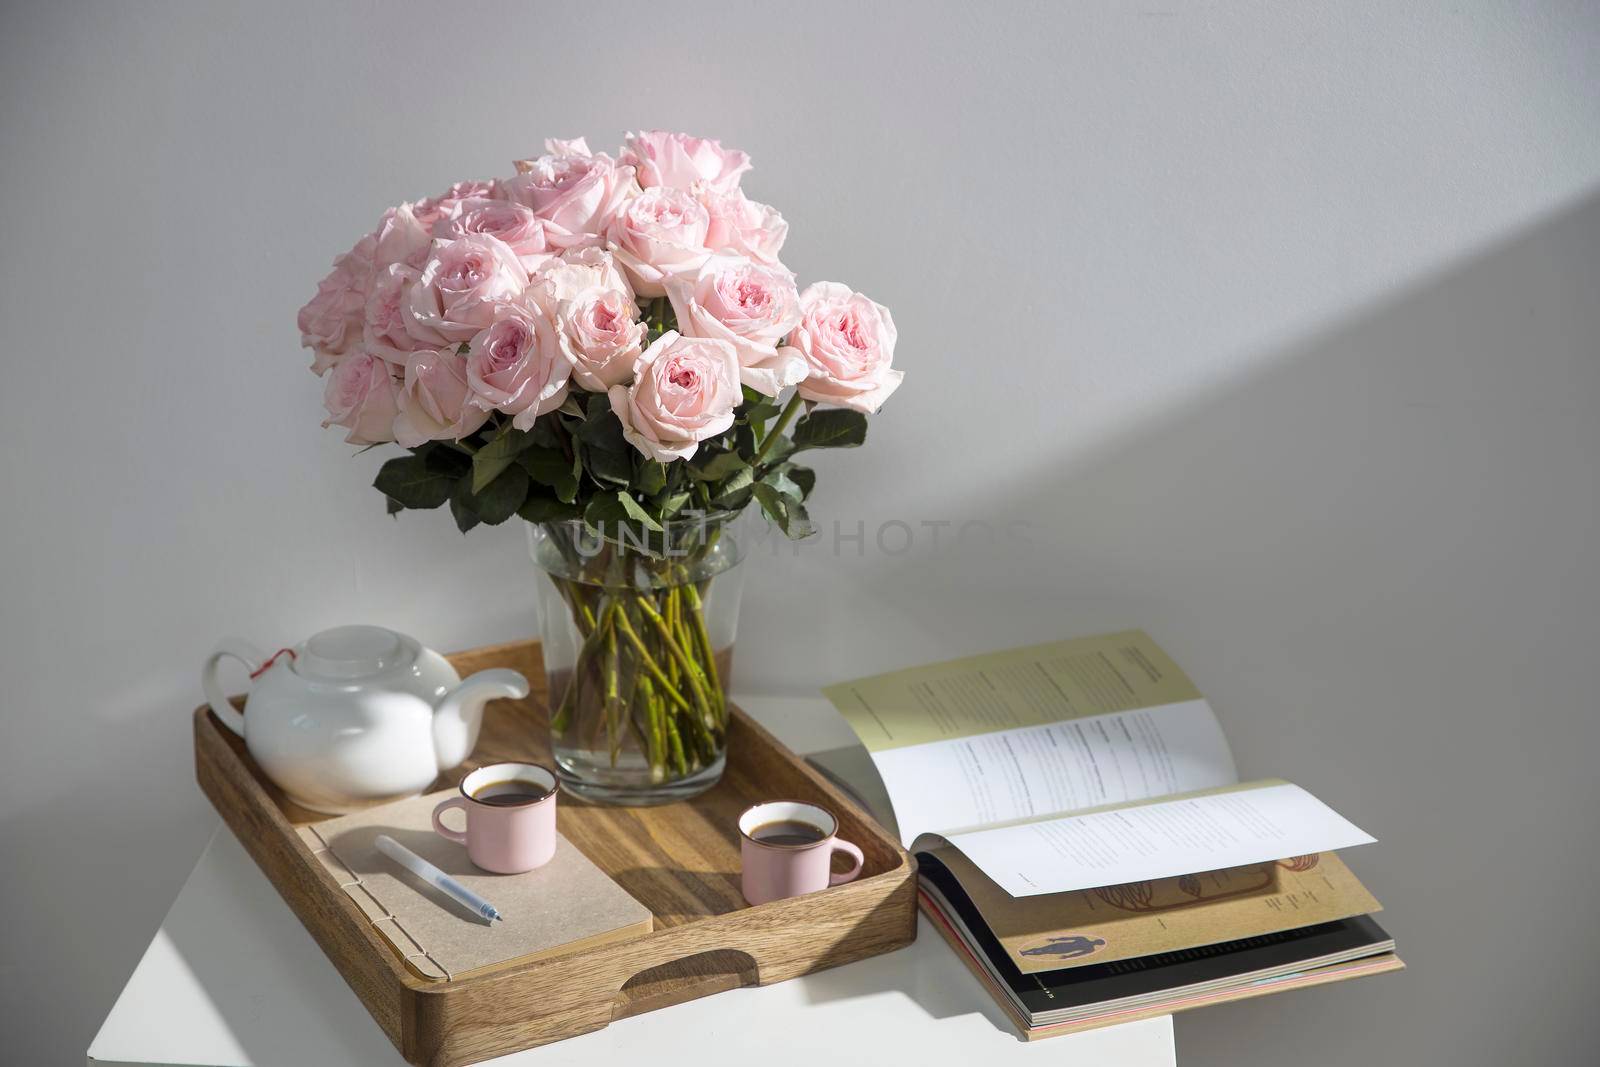 Bouquet of pink roses in a glass vase with a white teapot and two cappuccino cups on a tray on a coffee table among books by elenarostunova